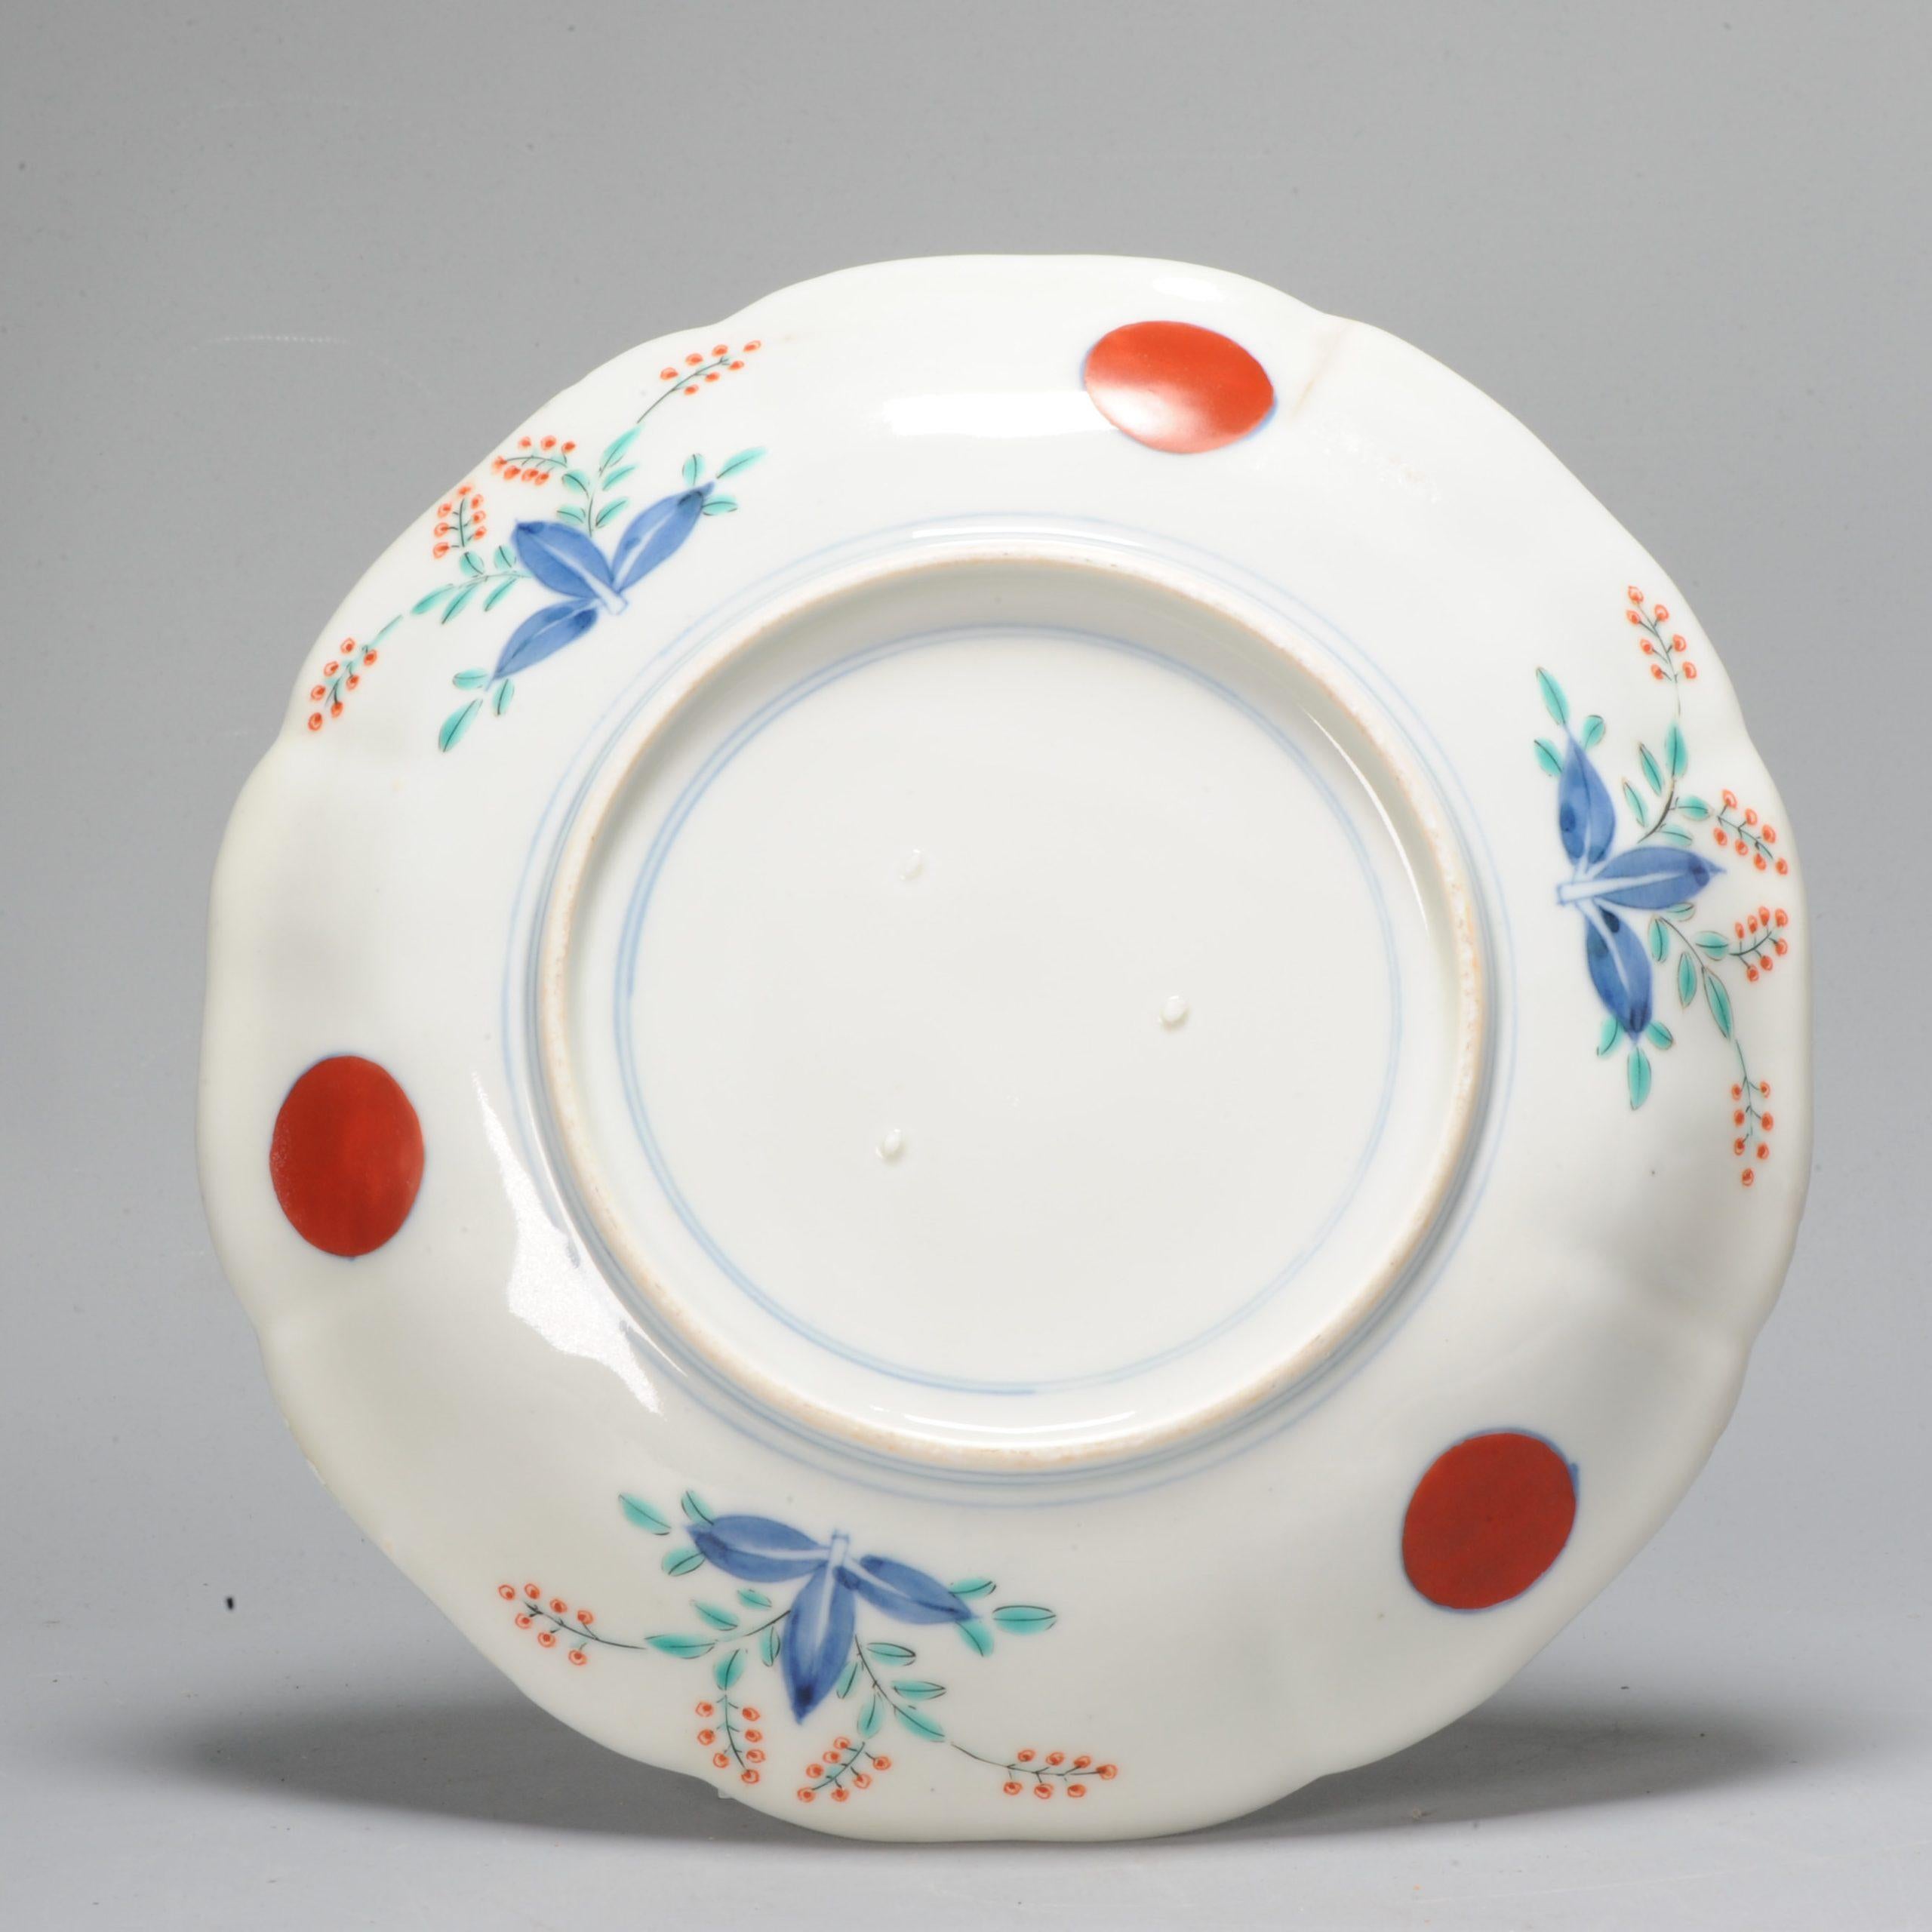 This amazing Japanese porcelain dish. Painted in underglaze blue as well as with polychrome enamels. This is most probably part of the Kakiemon family. Central a flower basket with prunus tree and birds flying on the top left. The border with rocks,